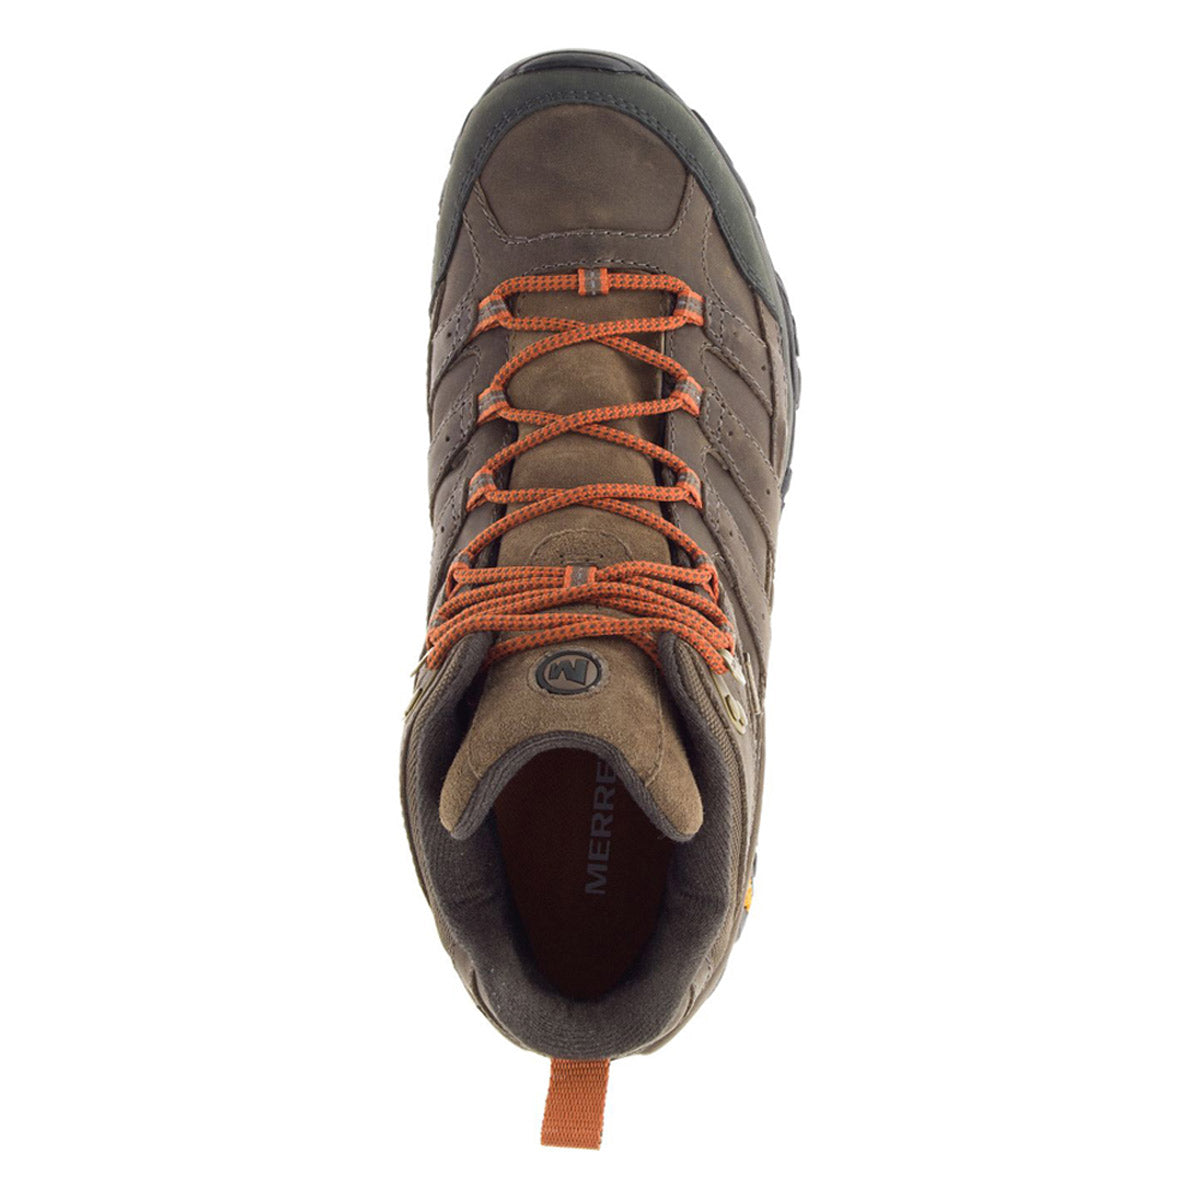 Top view of a single brown Merrell Moab 2 Prime Mid waterproof hiking shoe with orange laces.